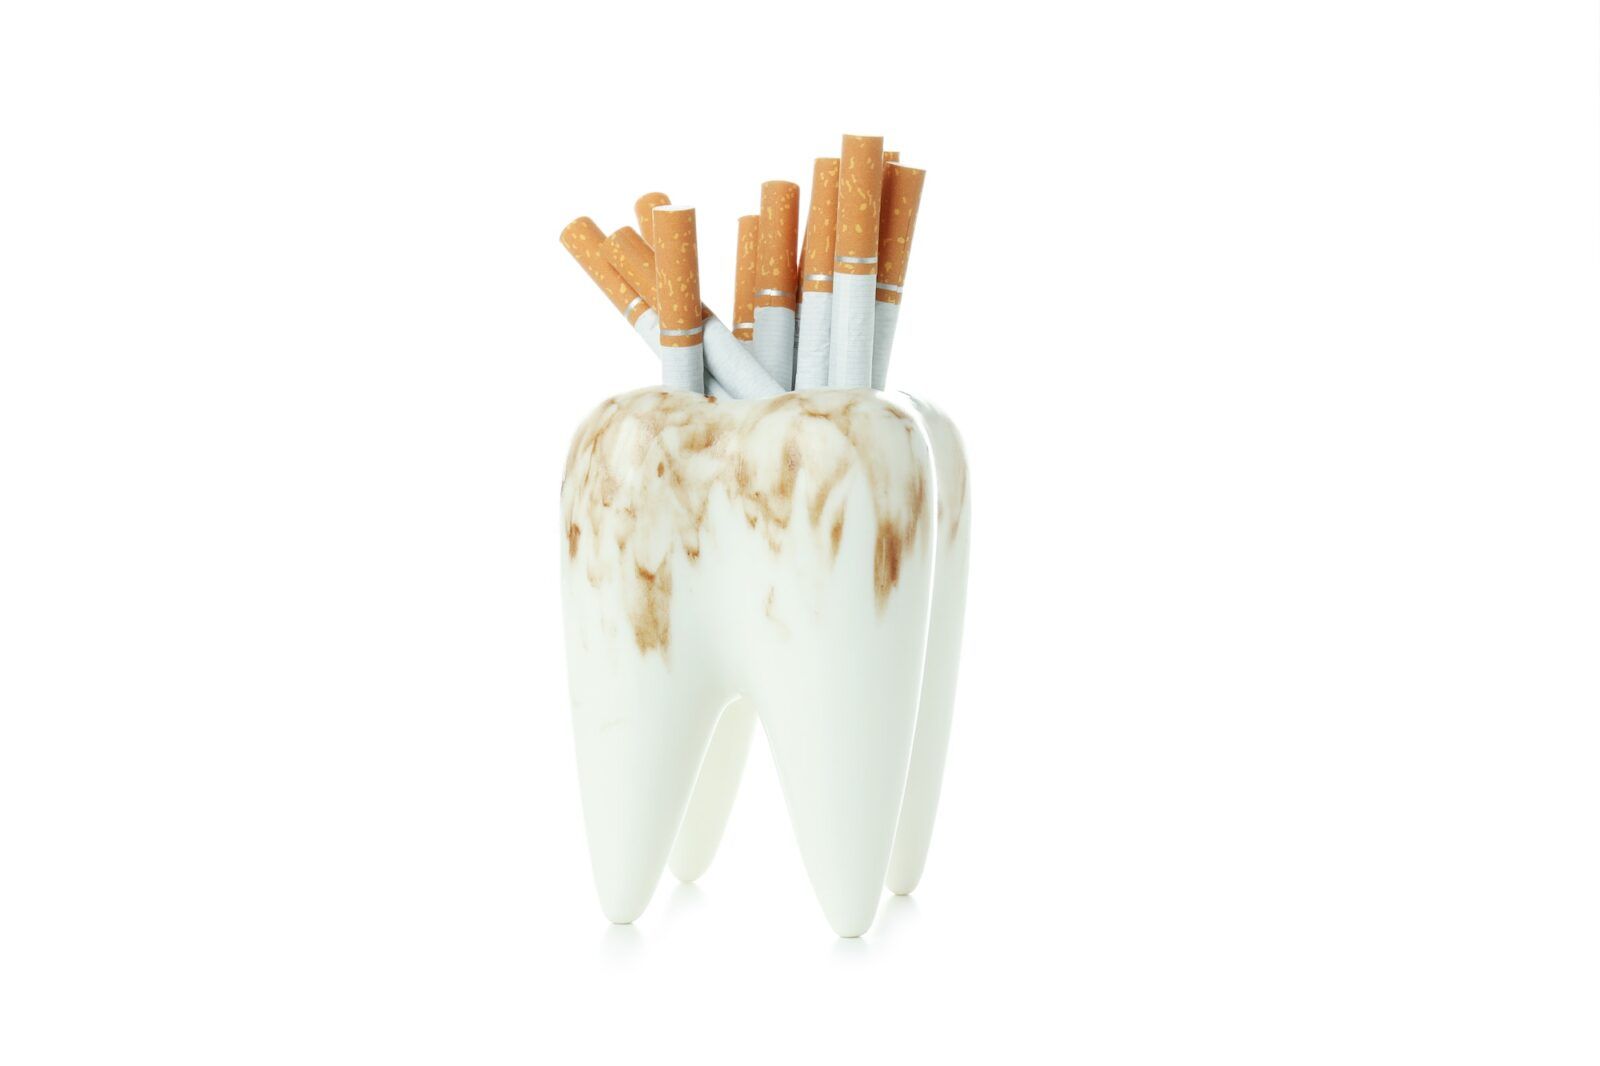 Concept of harm of smoking for teeth, isolated on white background